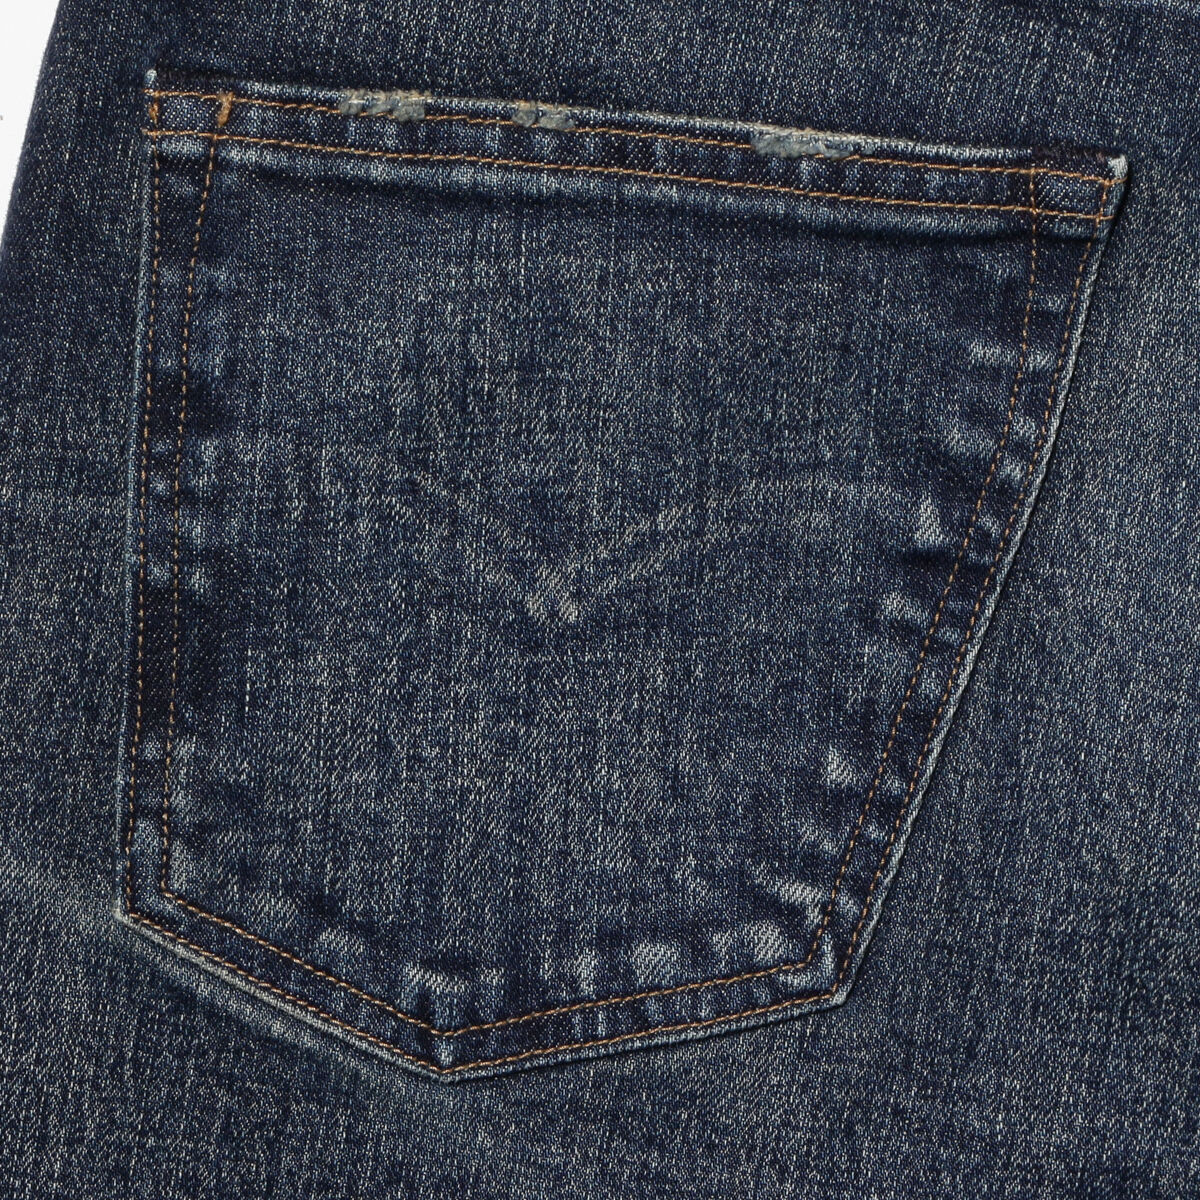 LEVI'S®MADE&CRAFTED™511™ UME MADE IN JAPAN｜リーバイス® 公式通販